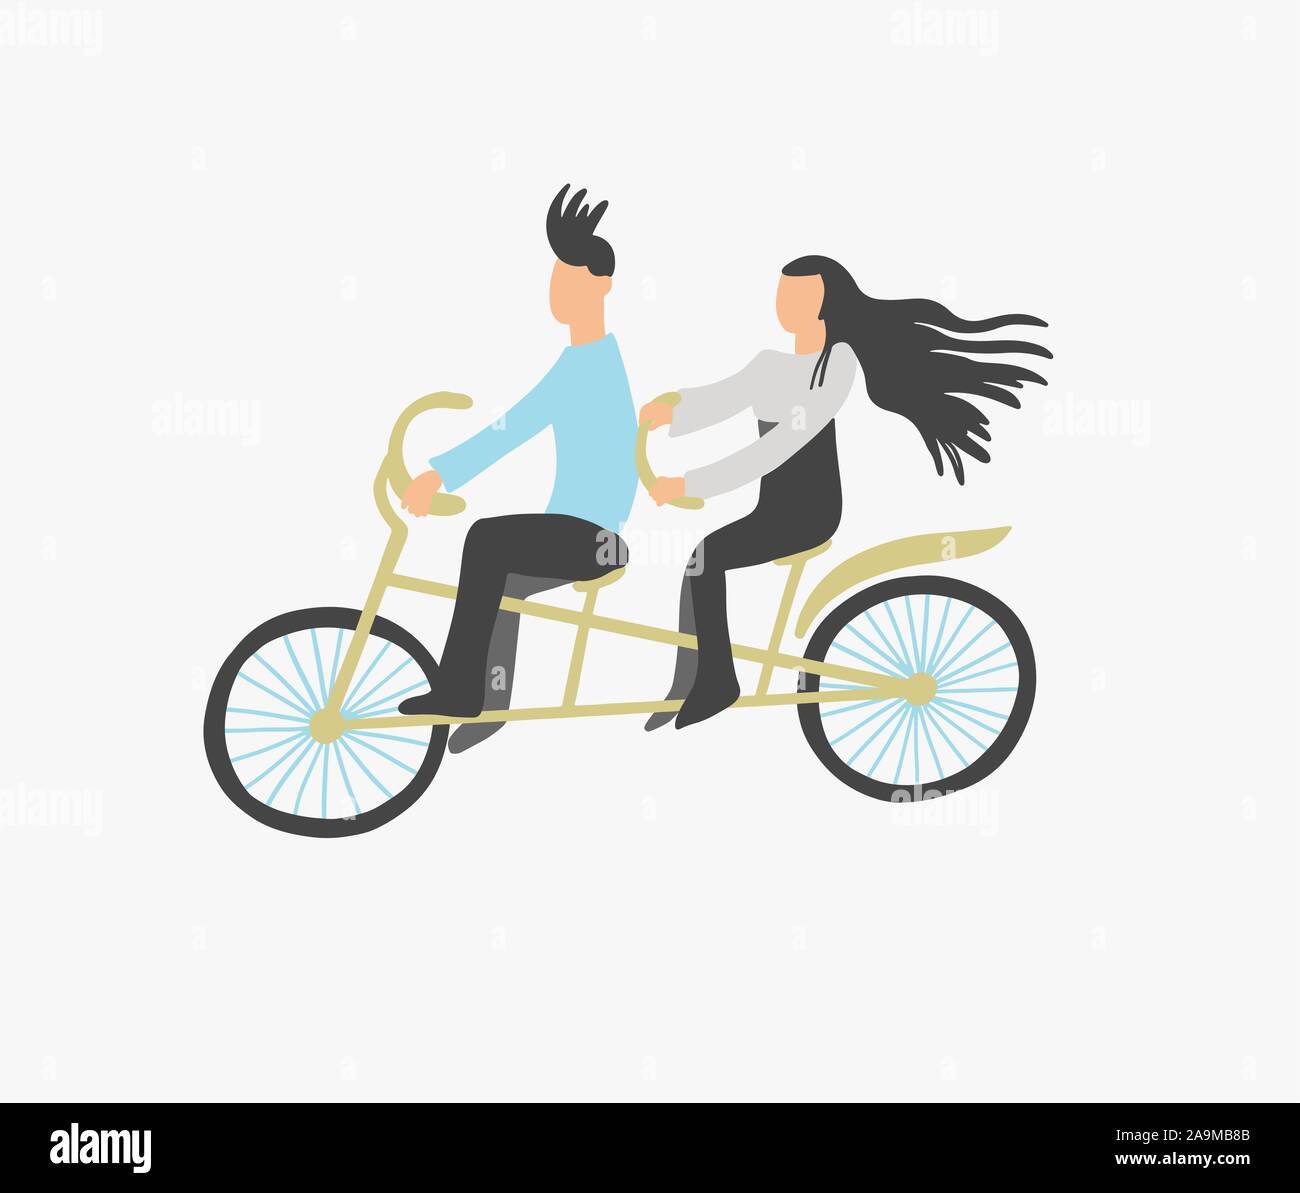 couple of young people ride a double city bike Stock Vector